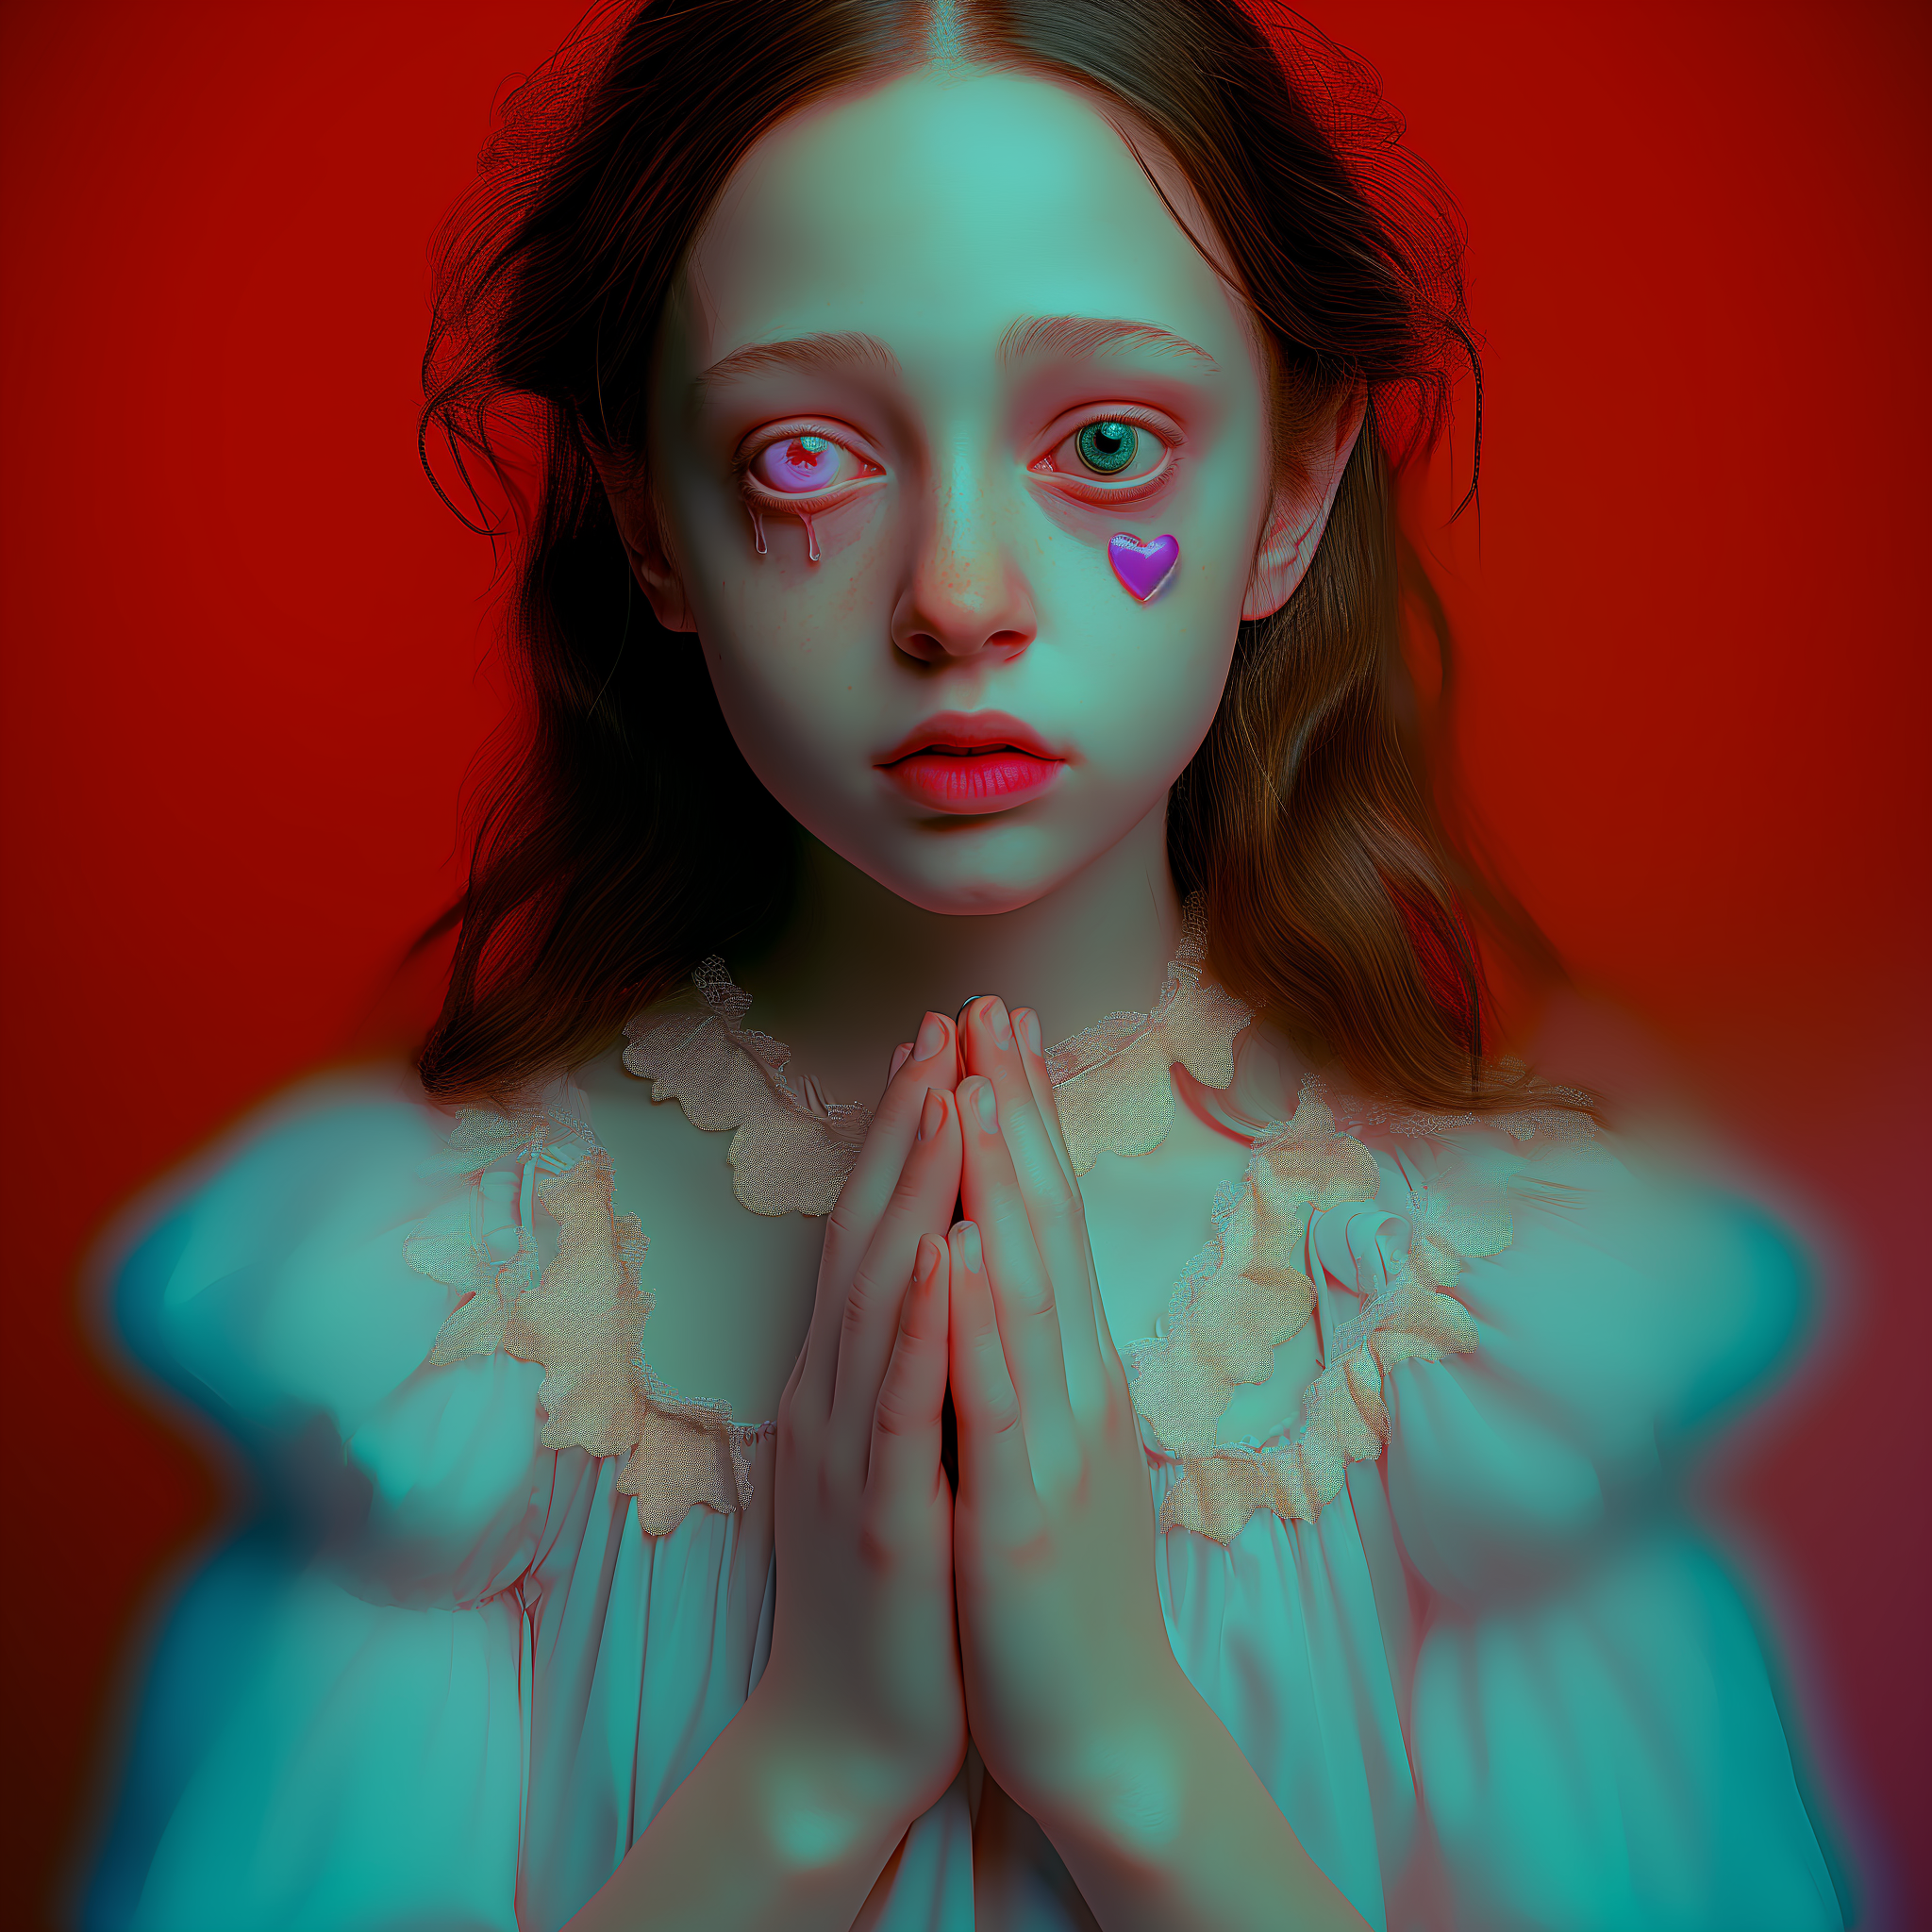 A digital portrait of a young girl with a serene expression, praying with her hands clasped together. She has pale skin and large, striking blue eyes that are welling with tears made of small red gemstones. Her hair is light brown and loosely pulled back. The girl has two heart-shaped patches, one on each cheek, and a third adorning her forehead, all in shades of red and pink. The background is a rich, uniform red that contrasts with her pale green vintage dress, which has delicate white lace at the collar. The image has a three-dimensional effect with a slight red and blue outline around her figure, suggesting an anaglyph 3D image